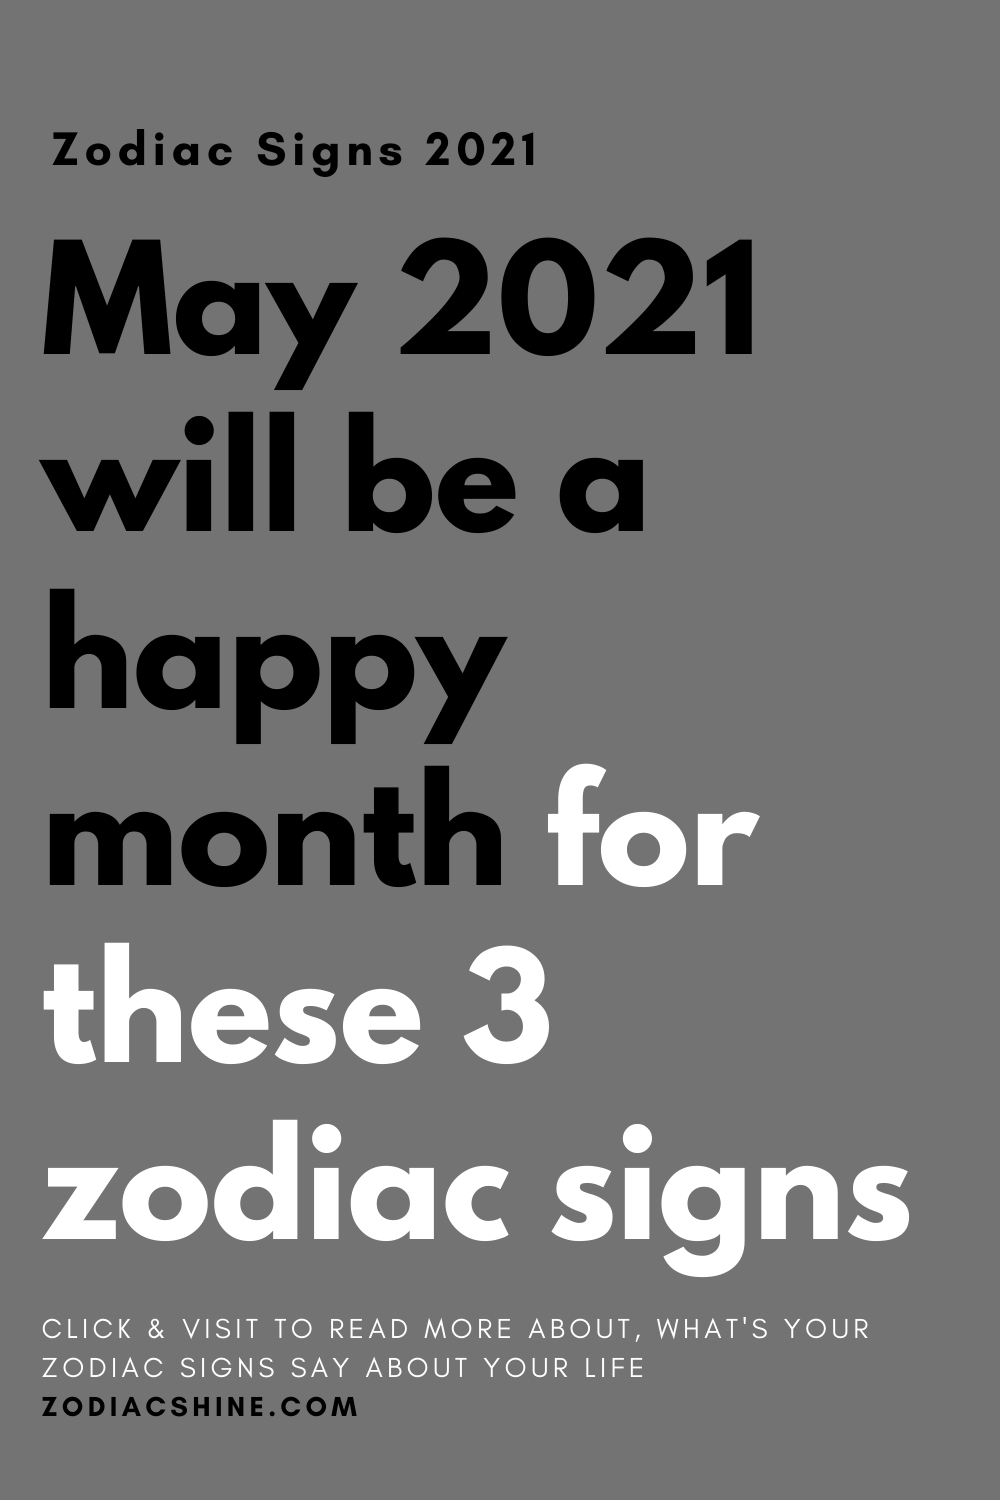 May 2021 will be a happy month for these 3 zodiac signs